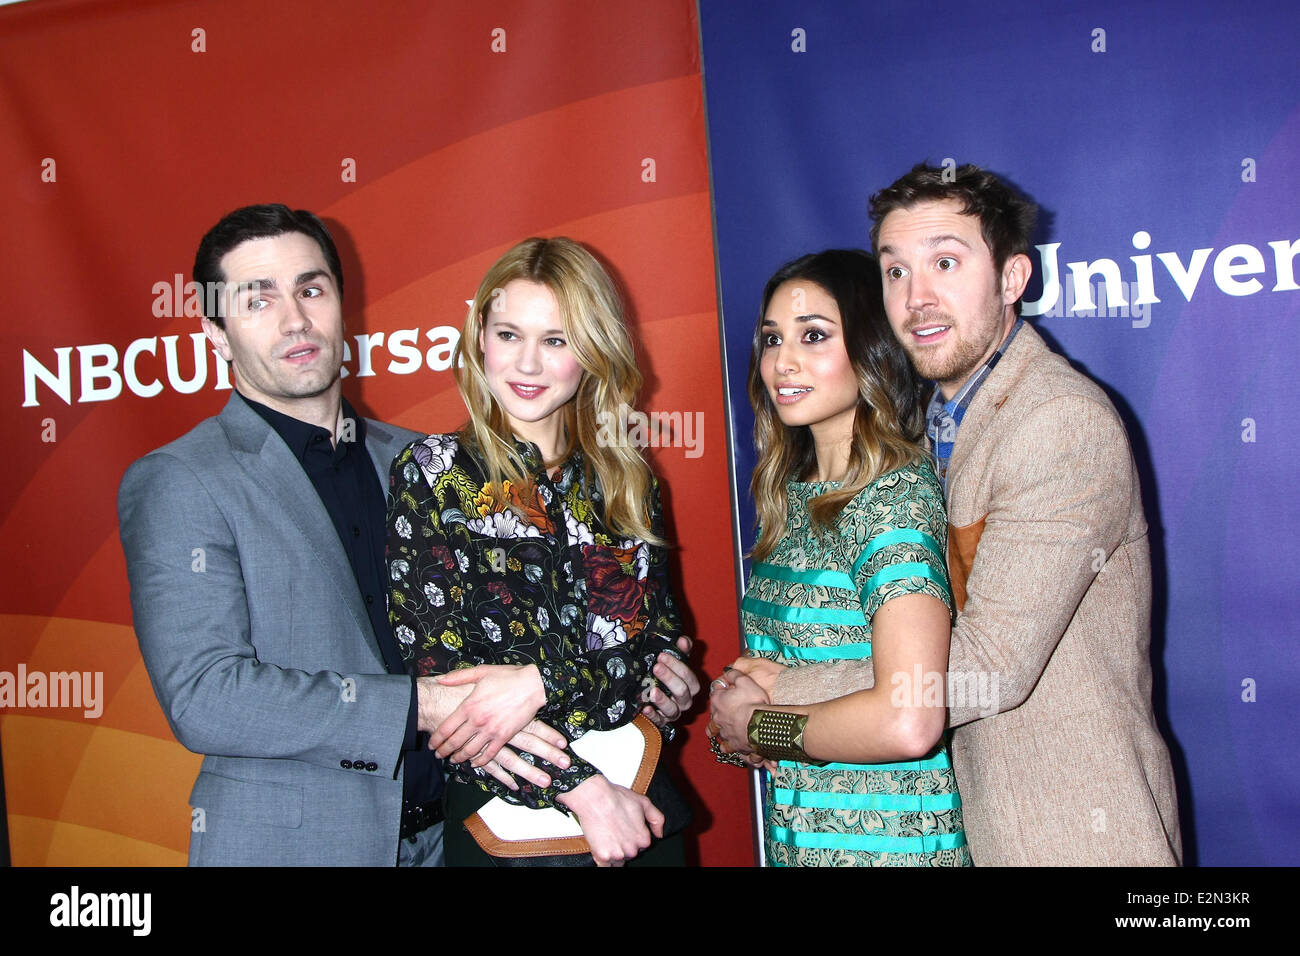 NBCUniversal 2013 TCA Winter Press Tour at Langham Huntington Hotel  Featuring: Sam Witwer,Meaghan Rath,Kristen Hager,Sam Huntington Where: Pasadena, CA, United States When: 07 Jan 2013 Stock Photo